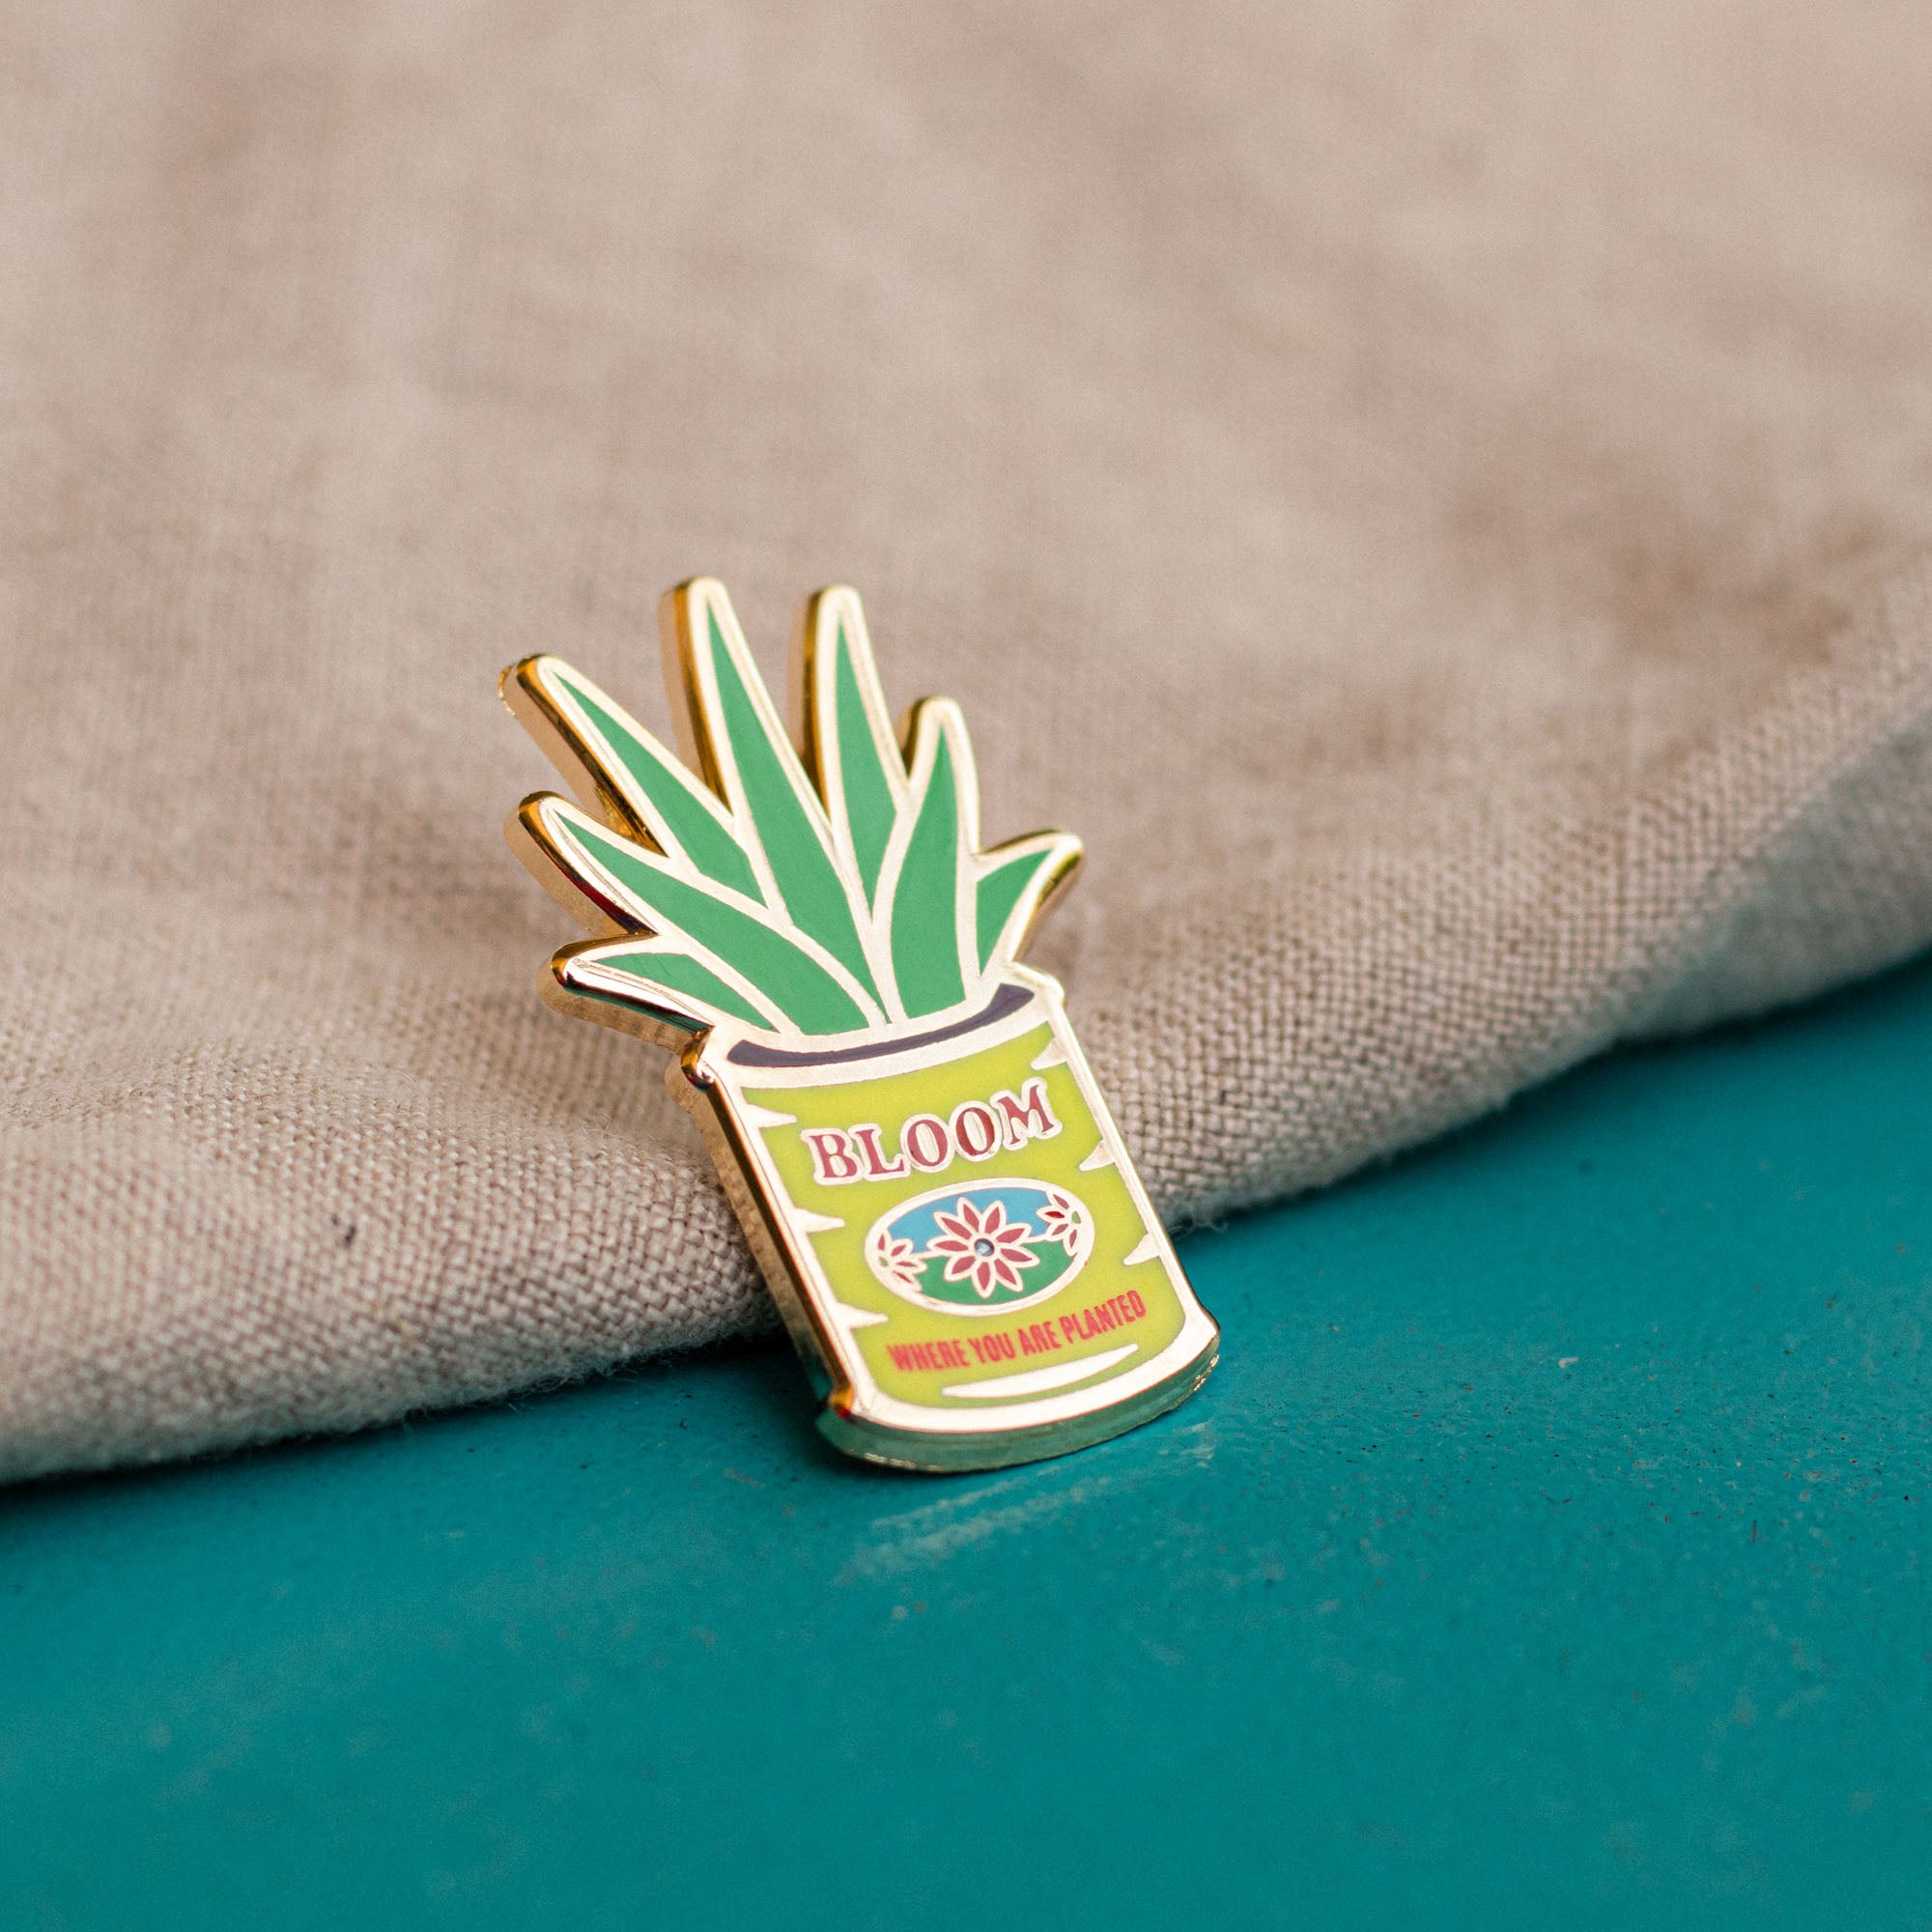 Bloom Where You Are Planted Enamel Pin